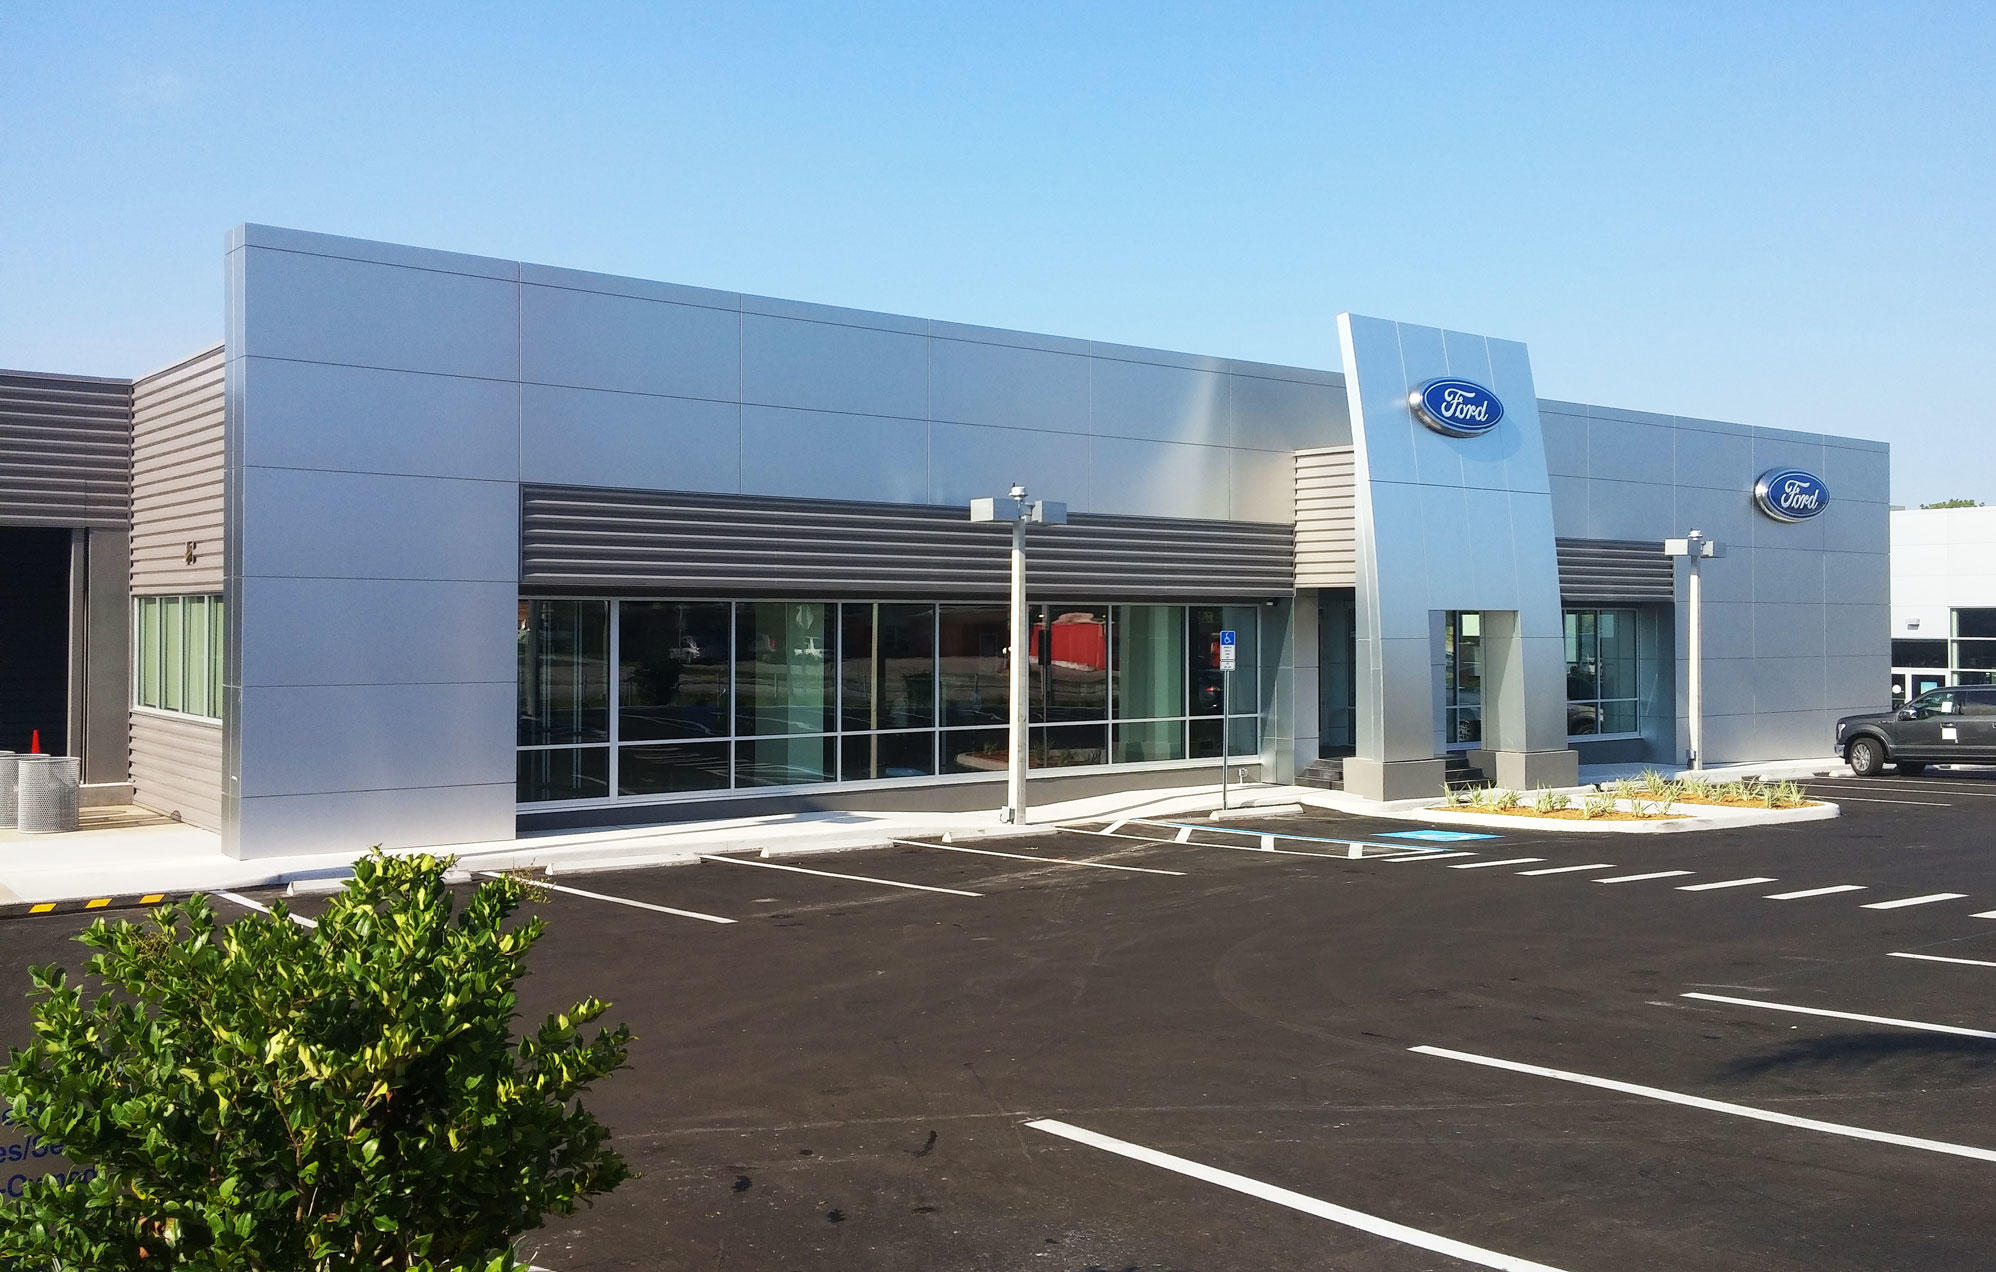 The all new Lakeland Ford is your new Central Florida destination Dealer! Come see the all new Lakeland Automall Ford Showroom and Service Department featuring FRESCOS Cafe and our state-of-the-art showroom.